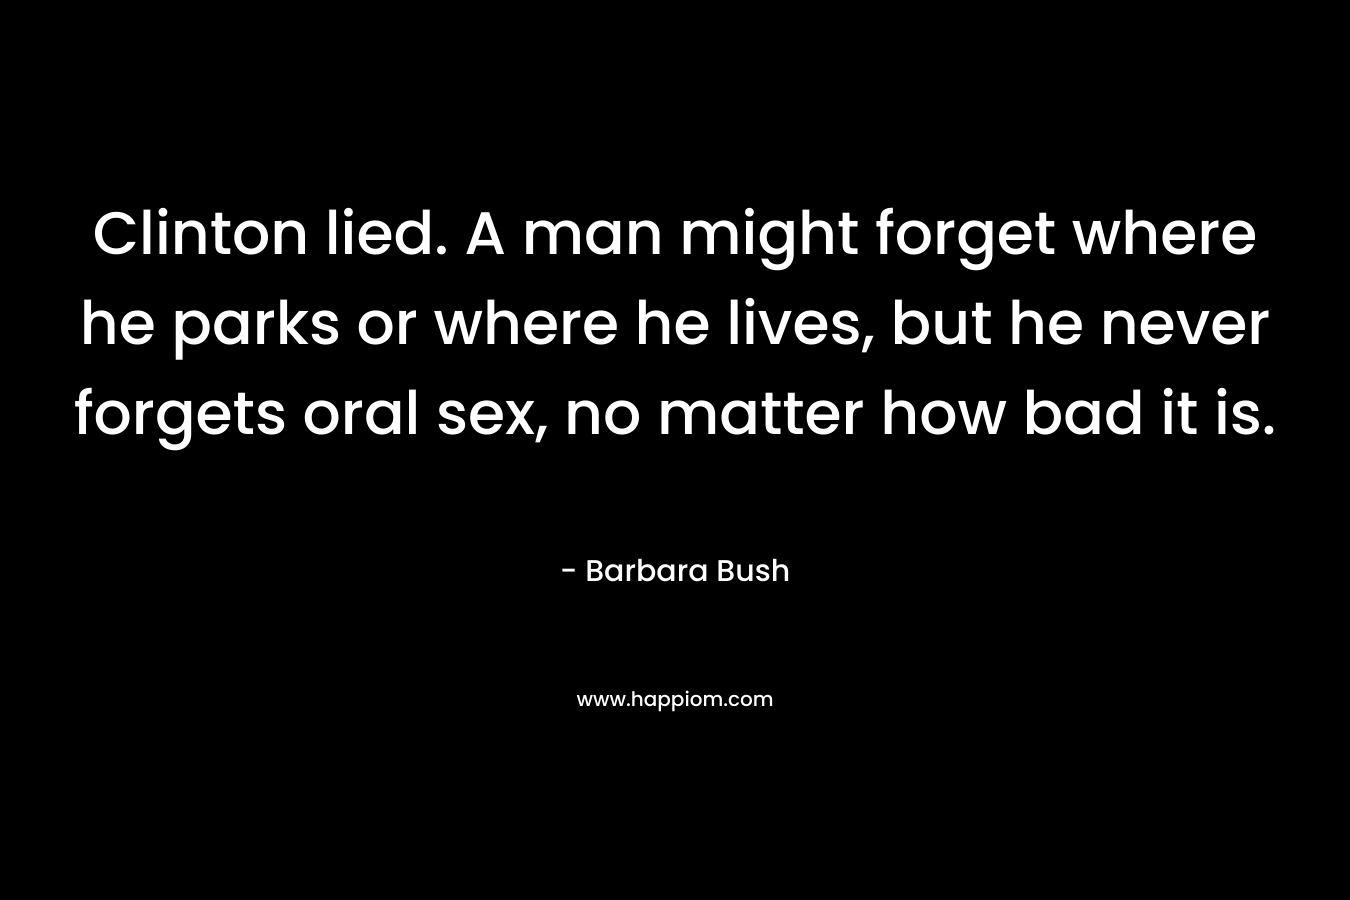 Clinton lied. A man might forget where he parks or where he lives, but he never forgets oral sex, no matter how bad it is. – Barbara Bush